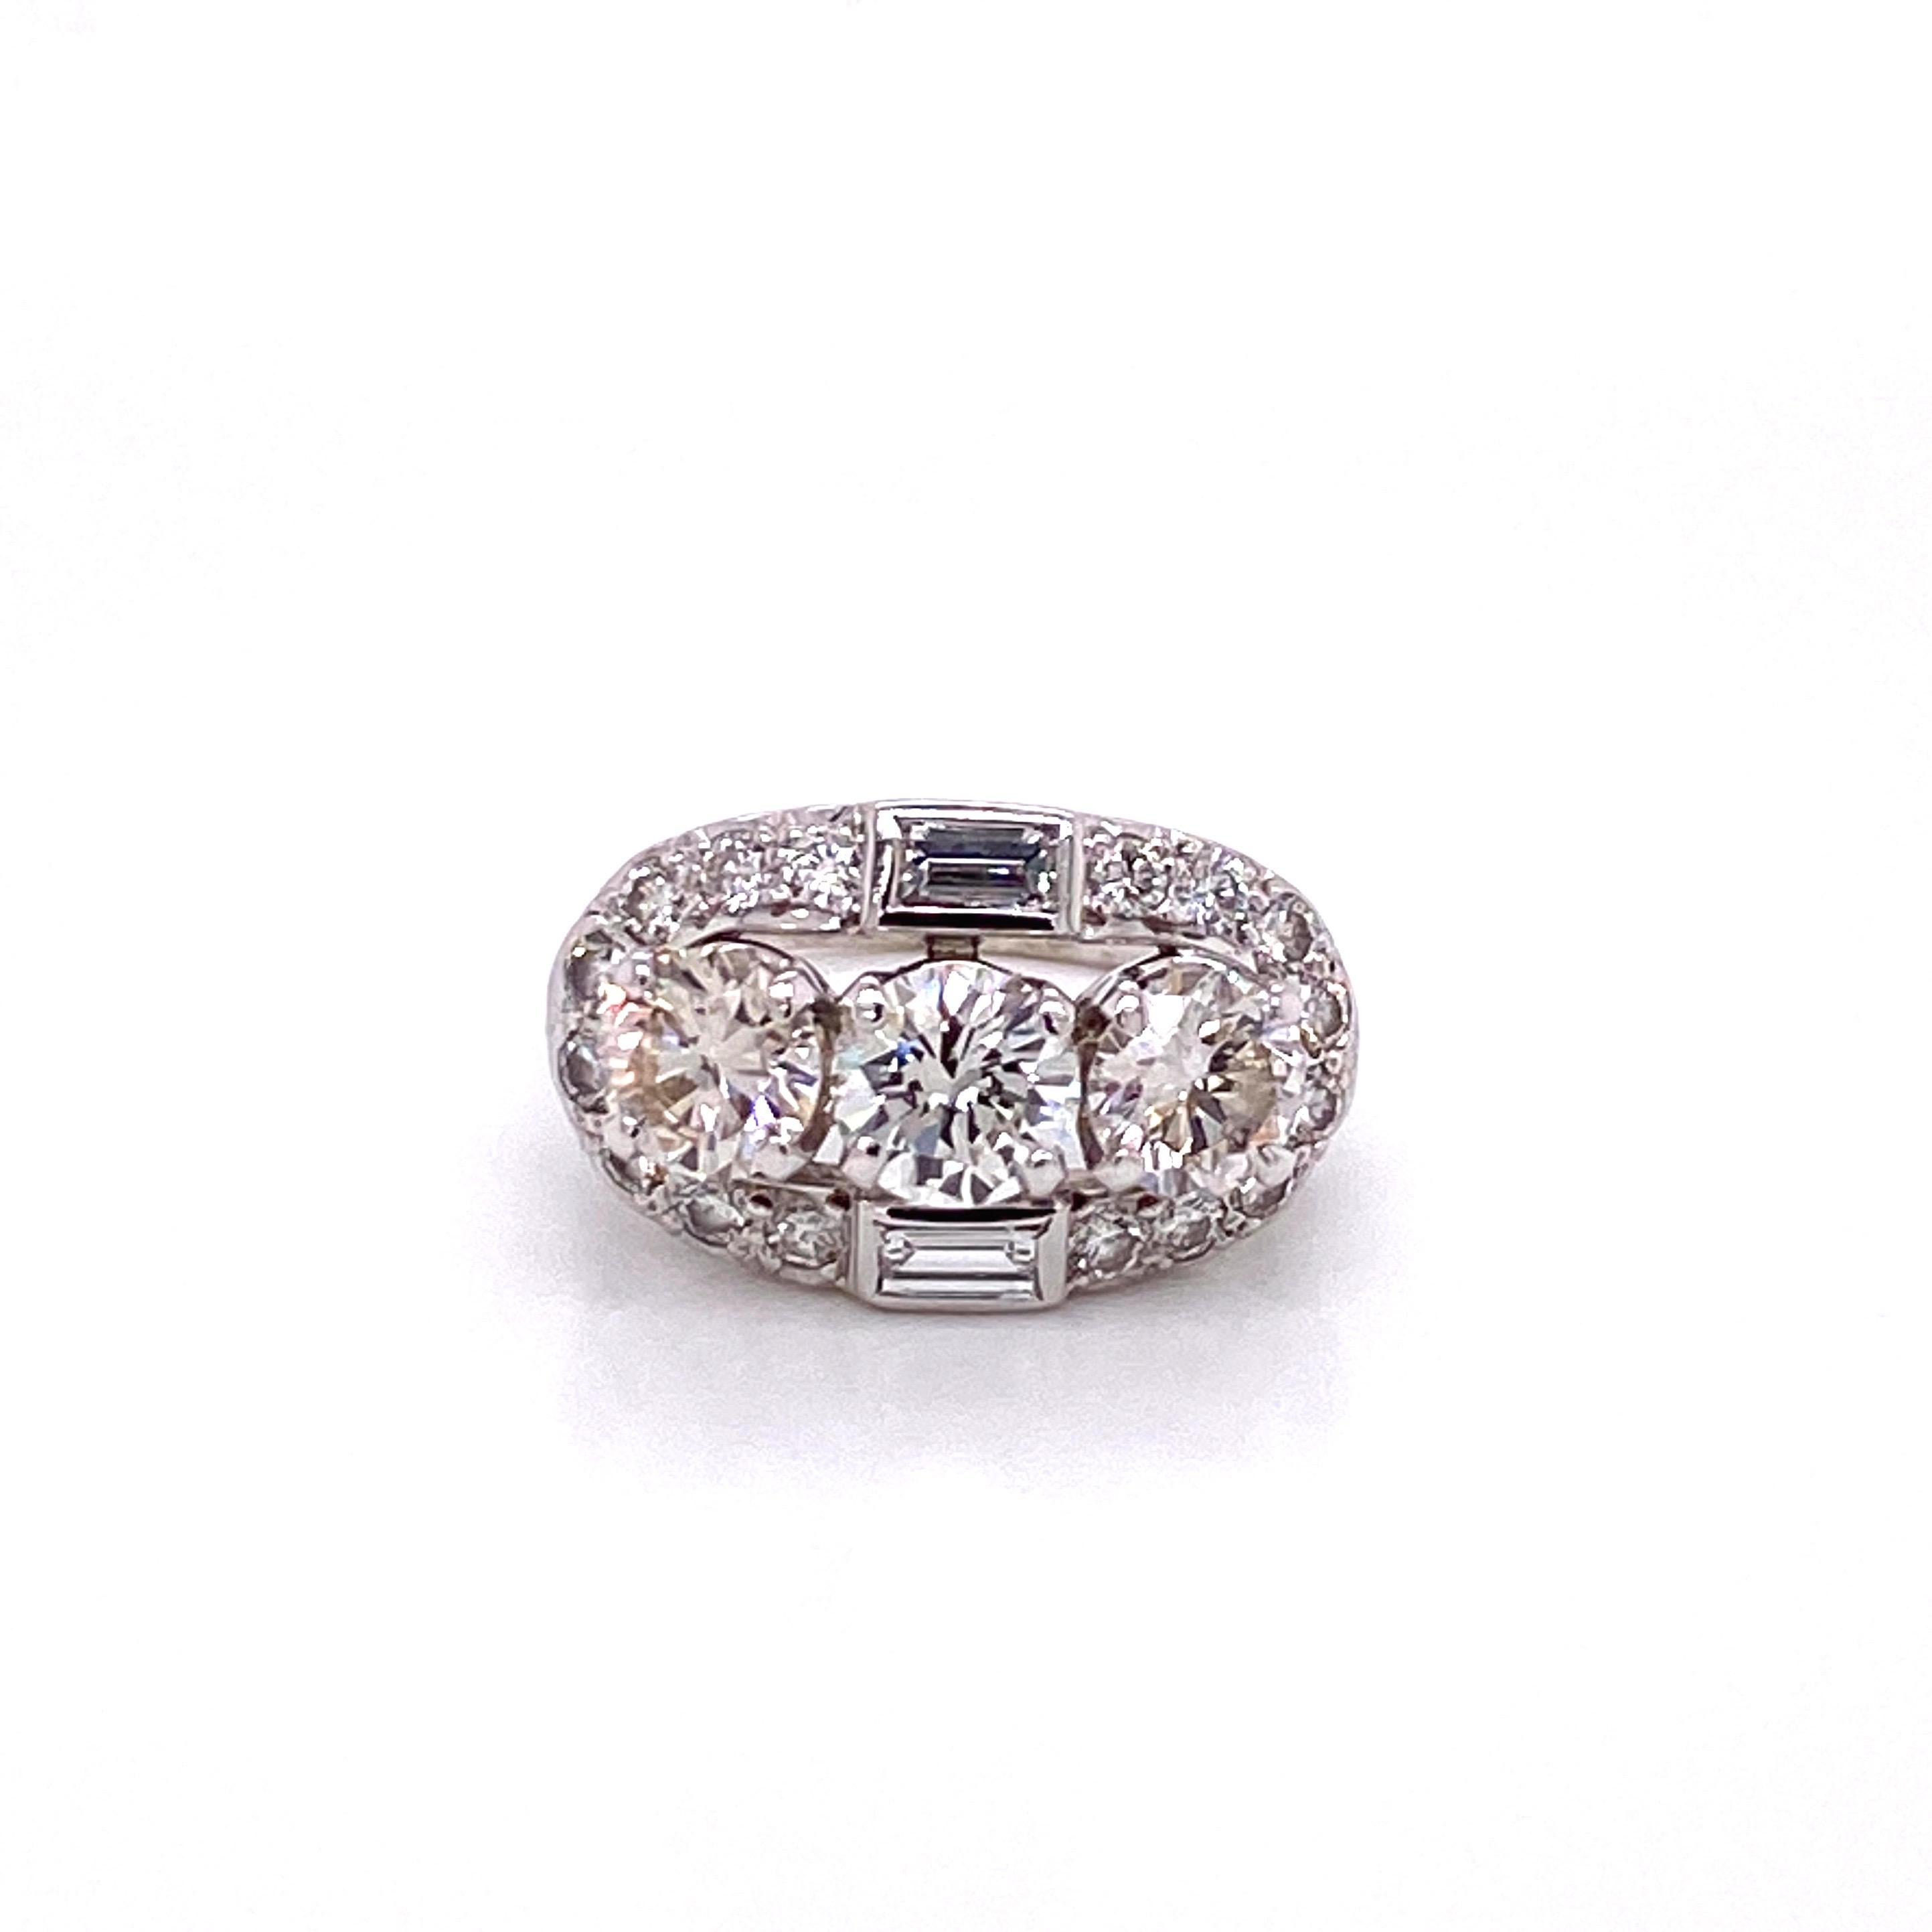 Vintage 1950s Retro 3 Stone Diamond Ring - The center 3 round diamonds are approximately .85ct each for a total weight of approximately 2.50ct. The diamonds are J-K color and VS1-VS2 clarity. Surrounding the 3 diamonds are 16 full cut diamonds and 2